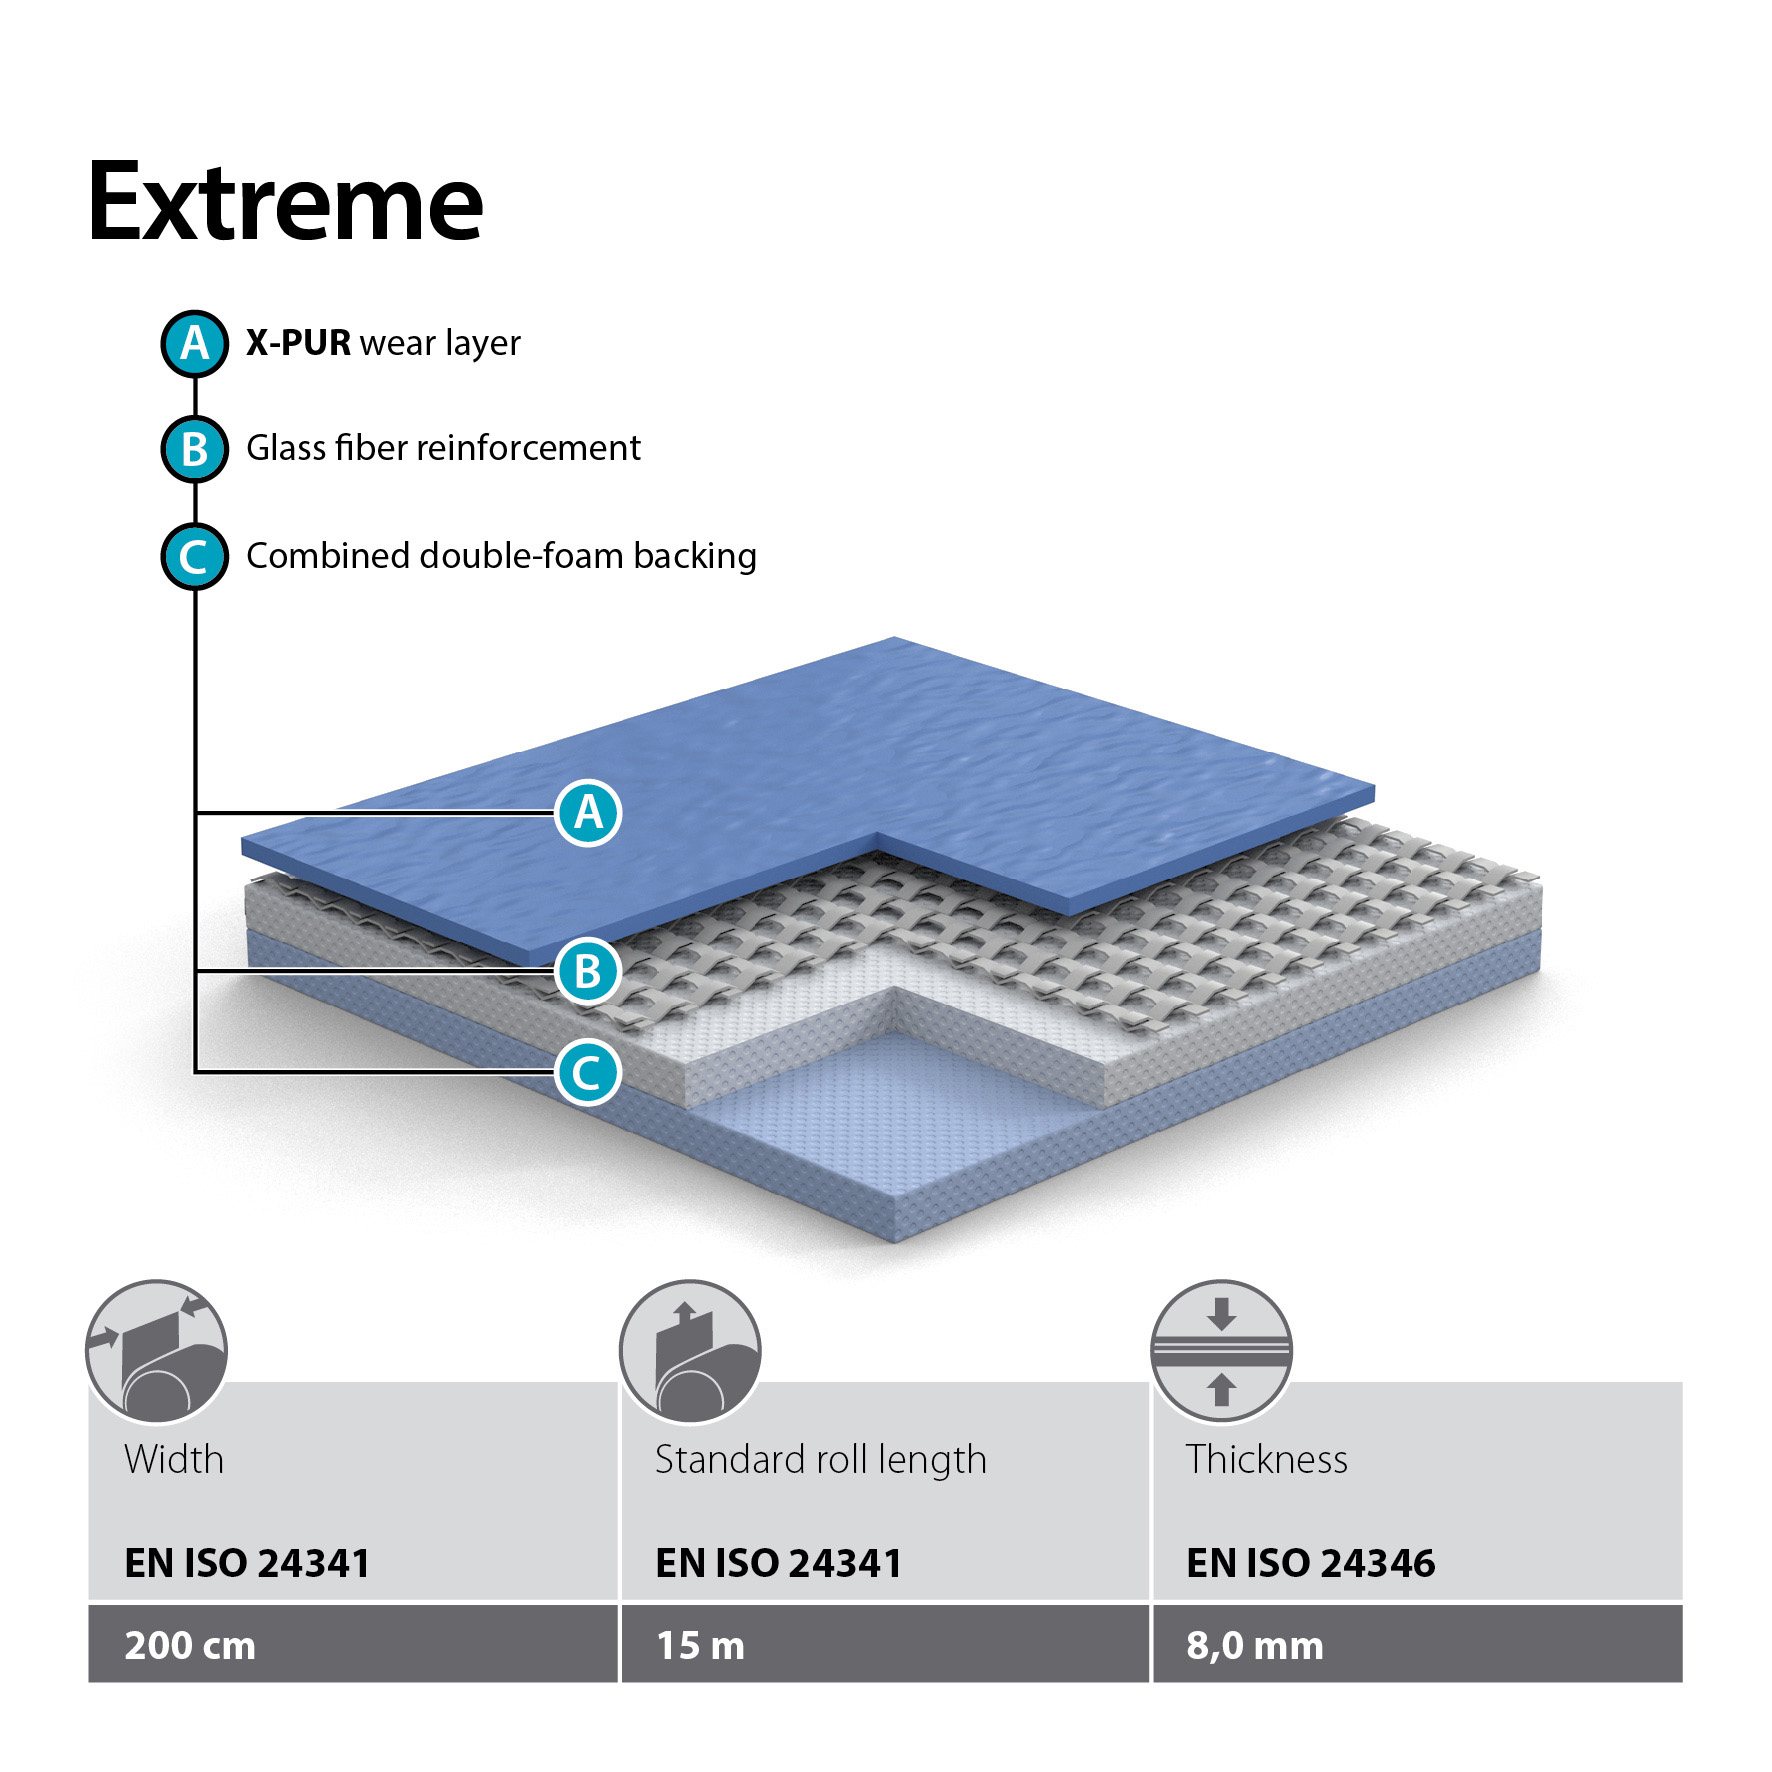 Graboplast's new sports floorings with X-PUR surface - GraboSport Extreme